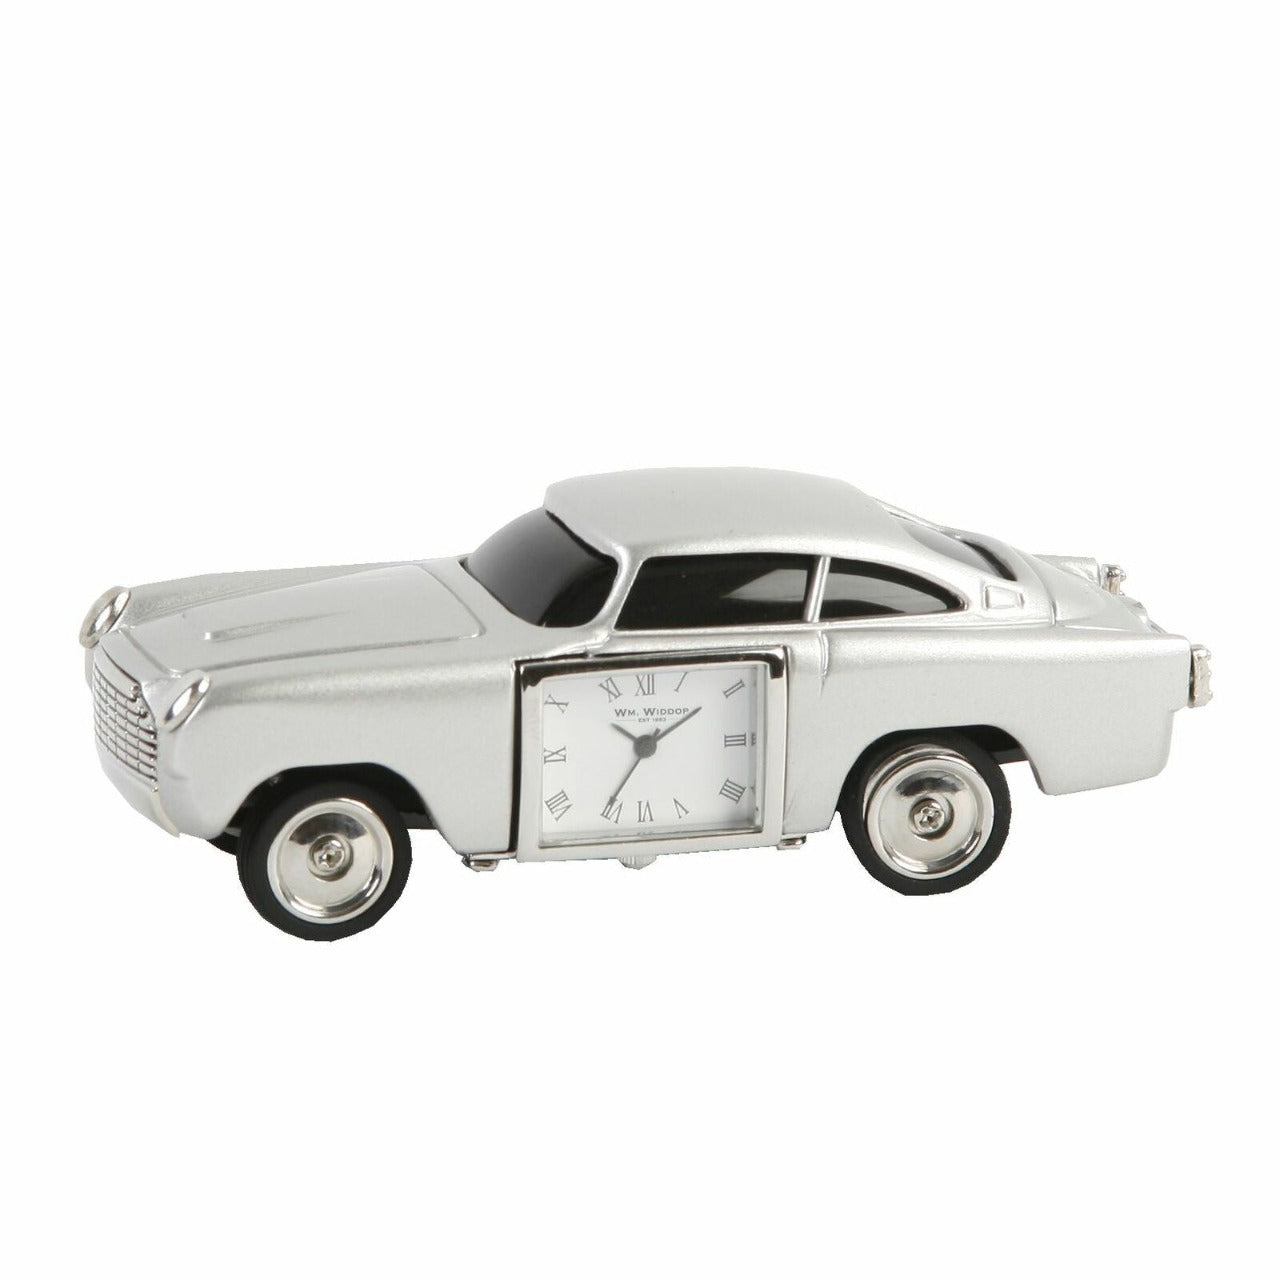 Miniature Clock Vintage Sportscar by William Widdop  Bring a uniquely refreshing touch to the home with this stylish miniature clock that makes for a great gift for anyone who is a fan of sports cars.  Whether it’s for an 18th birthday or 80th, this sports car miniature clock has a lasting style that will look great on a bedside table or a living room mantelpiece.